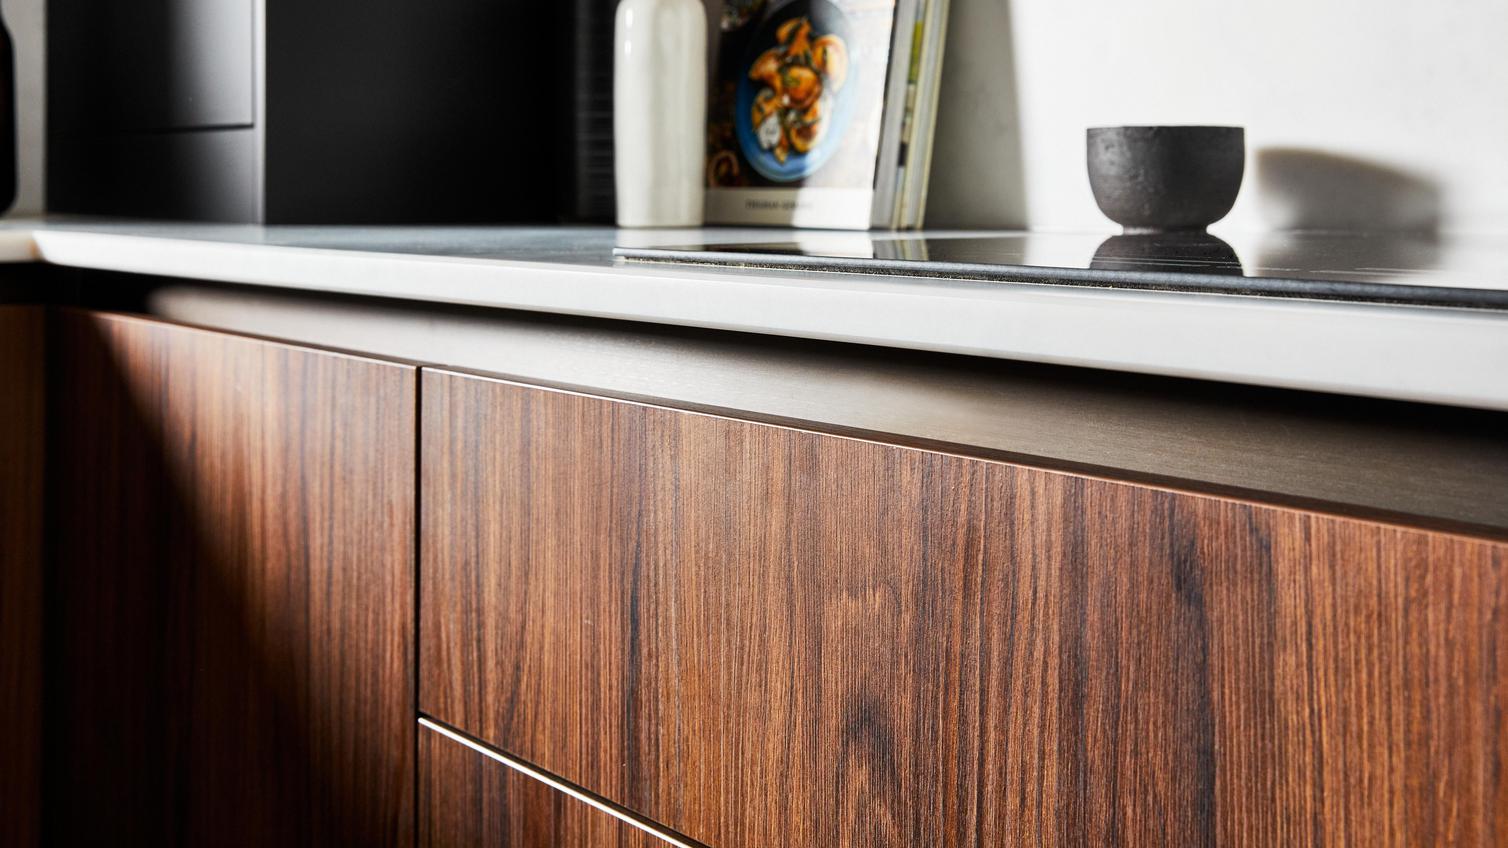 Handleless units featuring a black, metal profile along the top, walnut cupboard doors in a slab style, and white worktops.